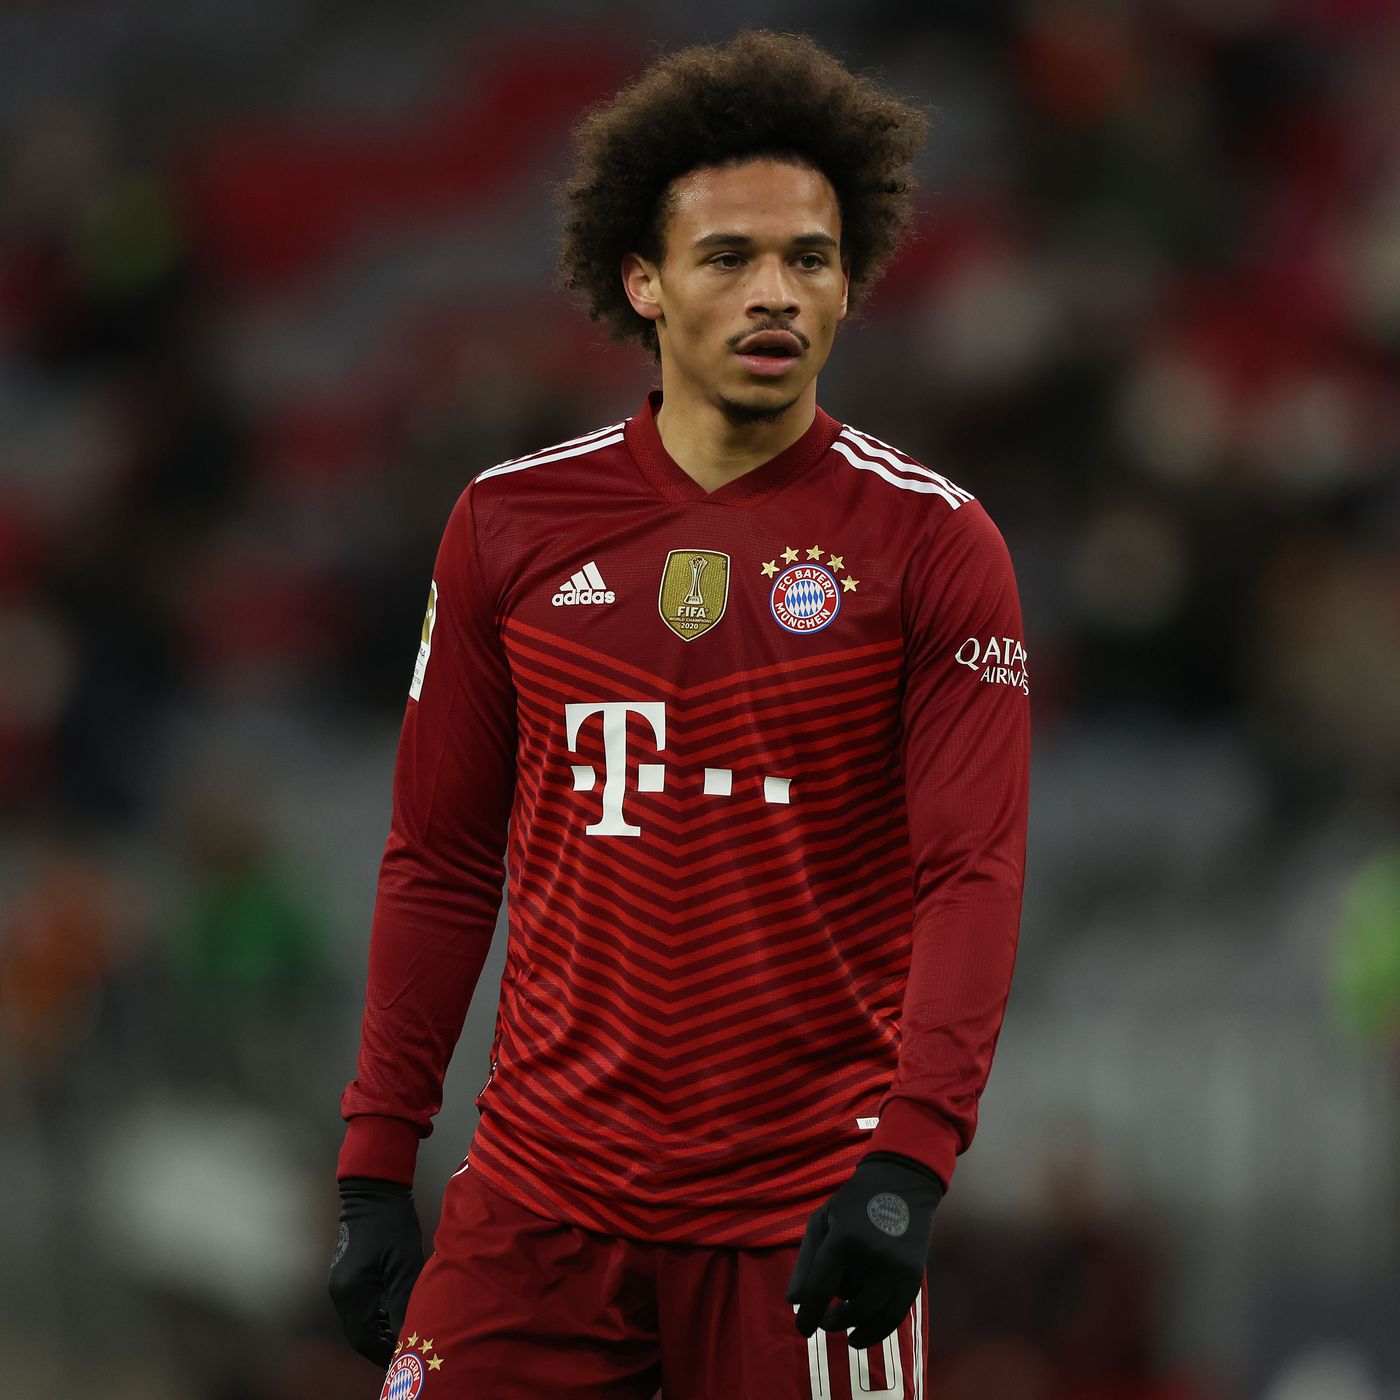 Karl-Heinz Rummenigge says Leroy Sane is a completely different player than when he first joined Bayern Munich - Bavarian Football Works